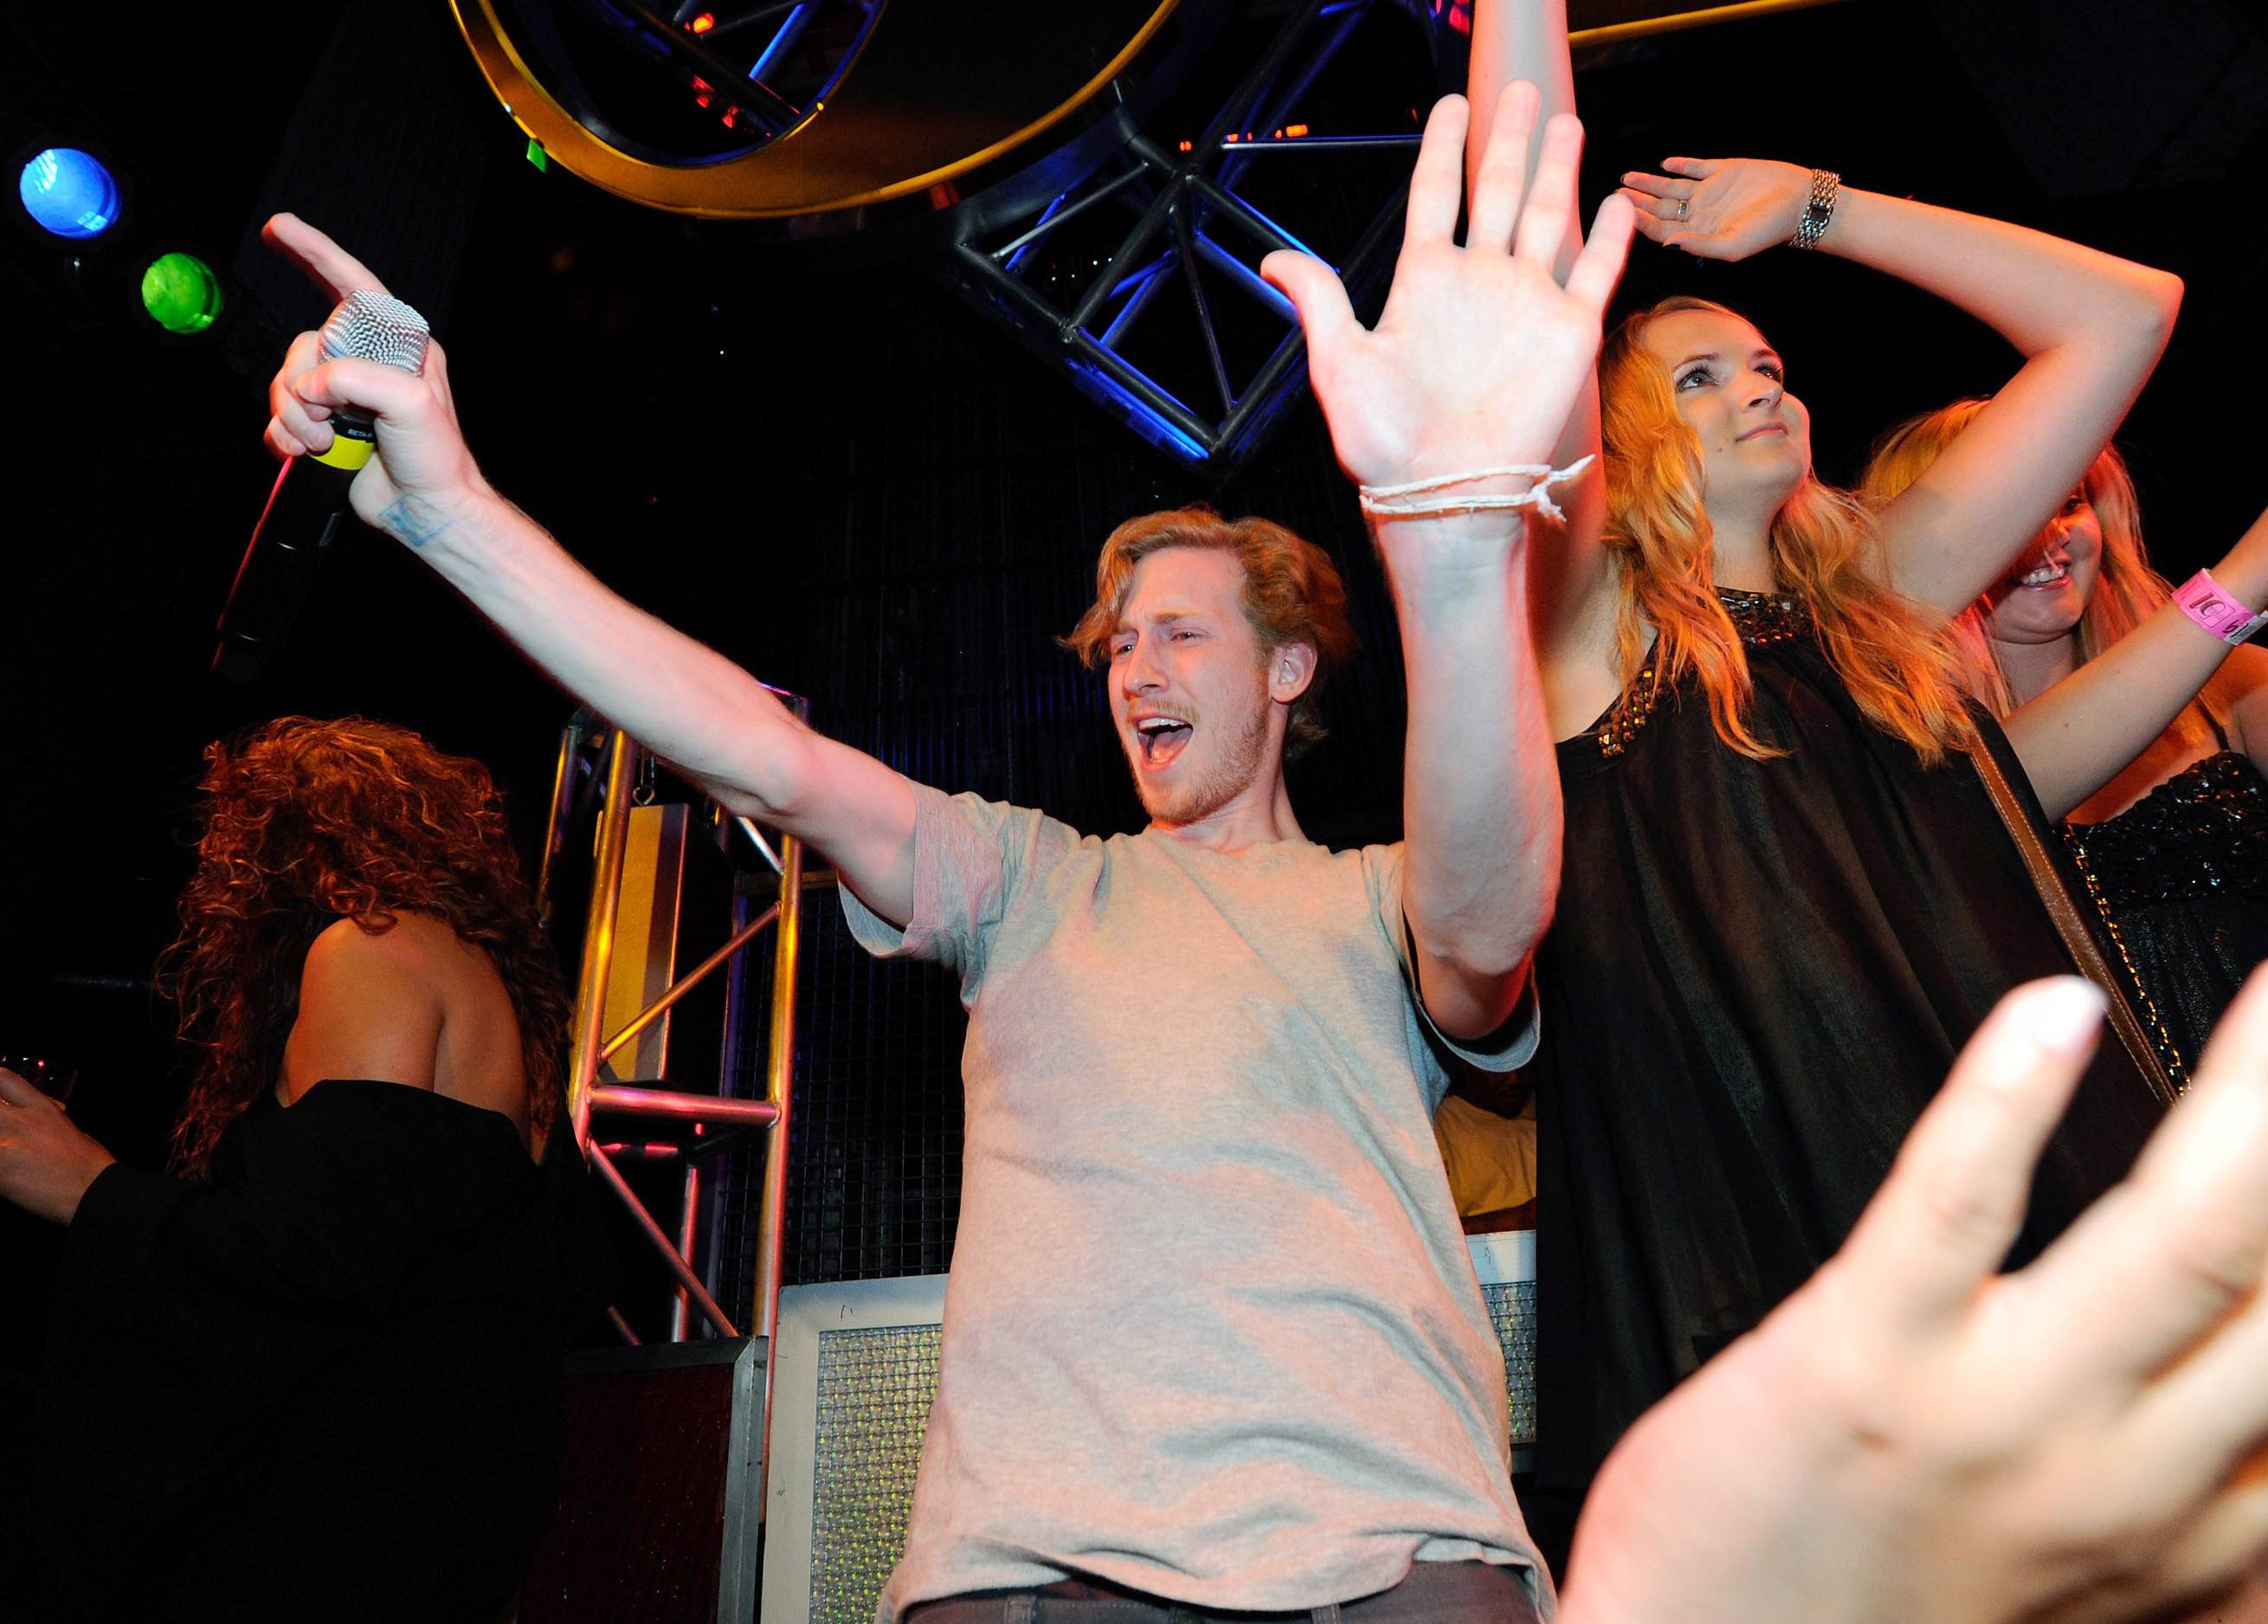 Asher Roth - The Morrisville, PA, rapper broke onto the music scene with his party anthem “I Love College.” The inevitable Eminem comparisons have curtailed some of Roth’s success as well as his debut album, Asleep in the Bread Aisle, which received mixed reviews.(Photo: Ethan Miller/Getty Images for MGM Resorts International)